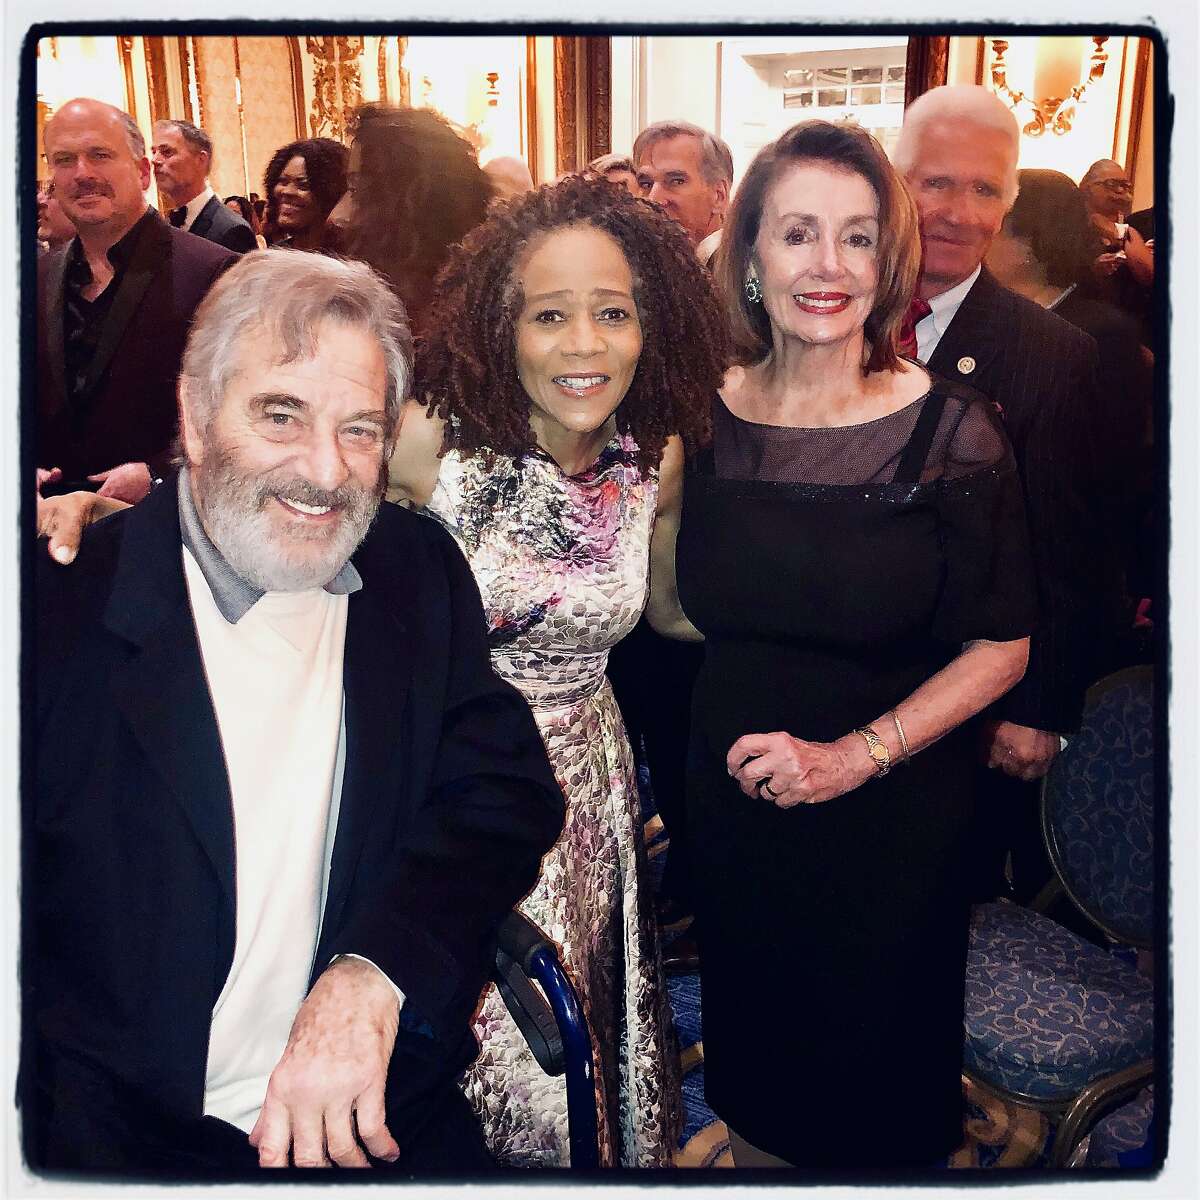 Paul Pelosi (left) with songbird Paula West and Speaker of the House Nancy Pelosi celebrate Willie Brown's 85th birthday at The Fairmont. March 22, 2019.